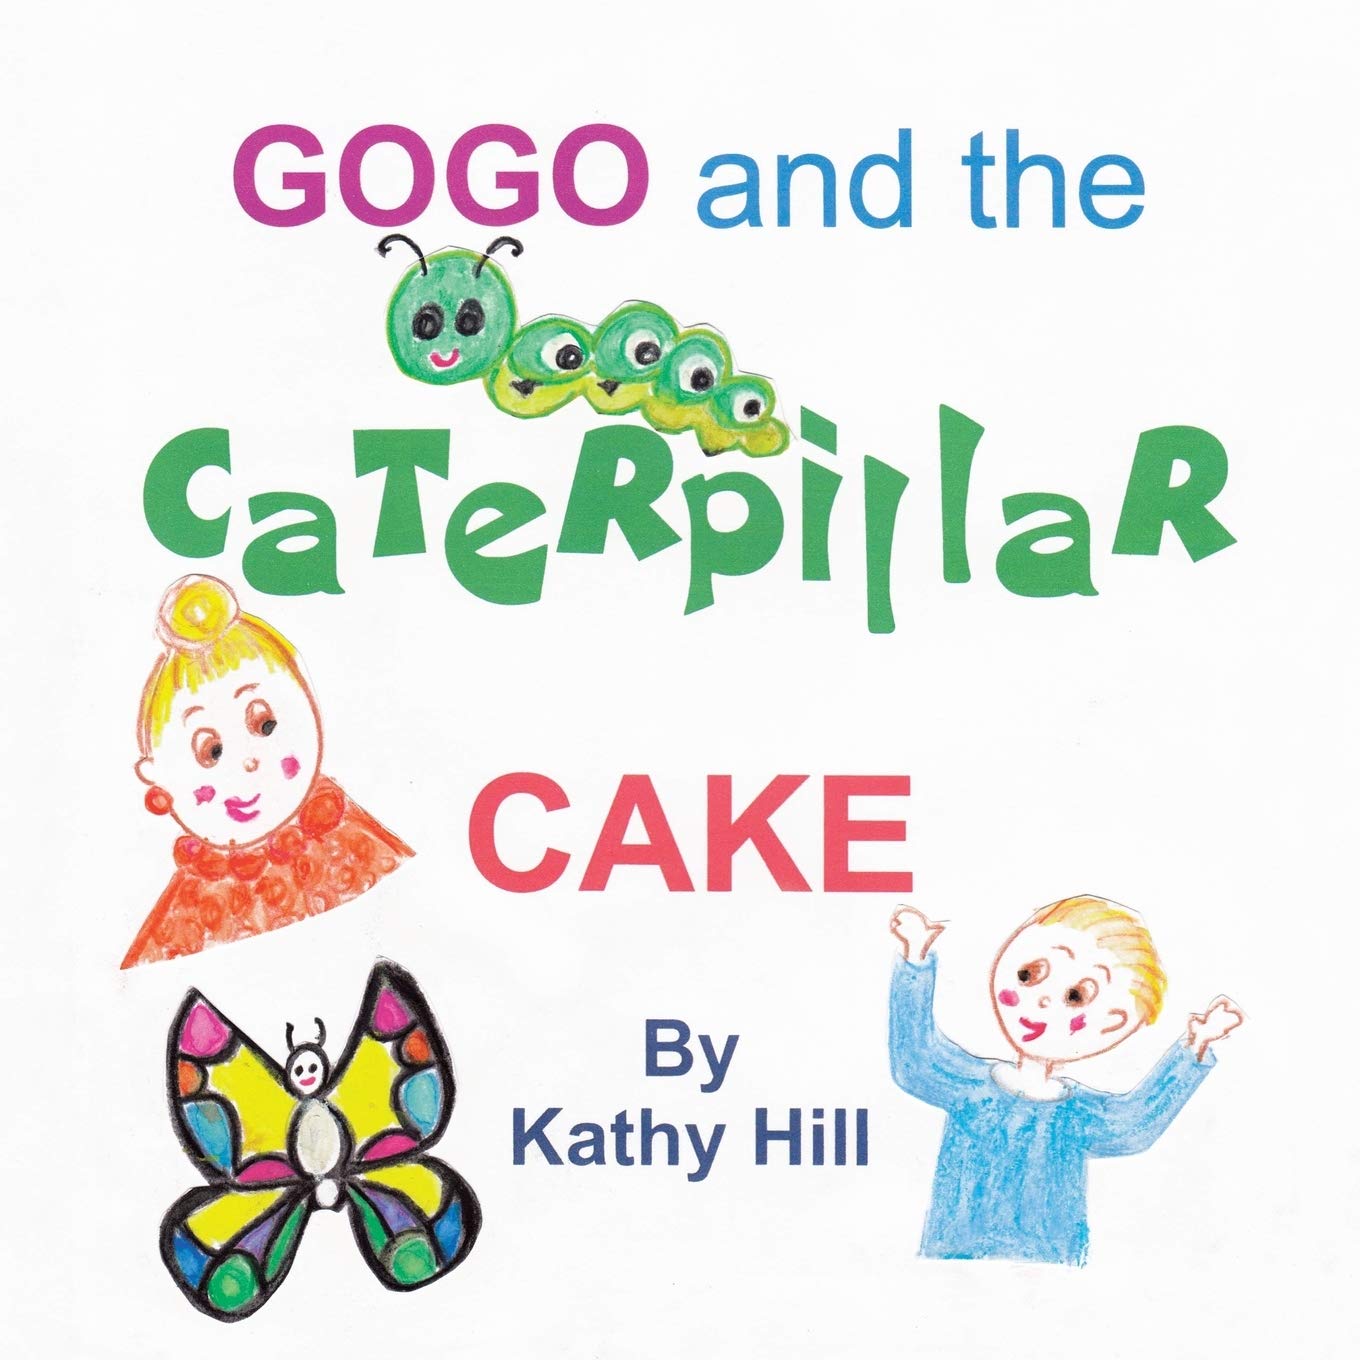 Kathy Hill, Author’s Tranquility Press Offers "Extraordinary" Baking Lessons in Gogo and the Caterpillar Cake